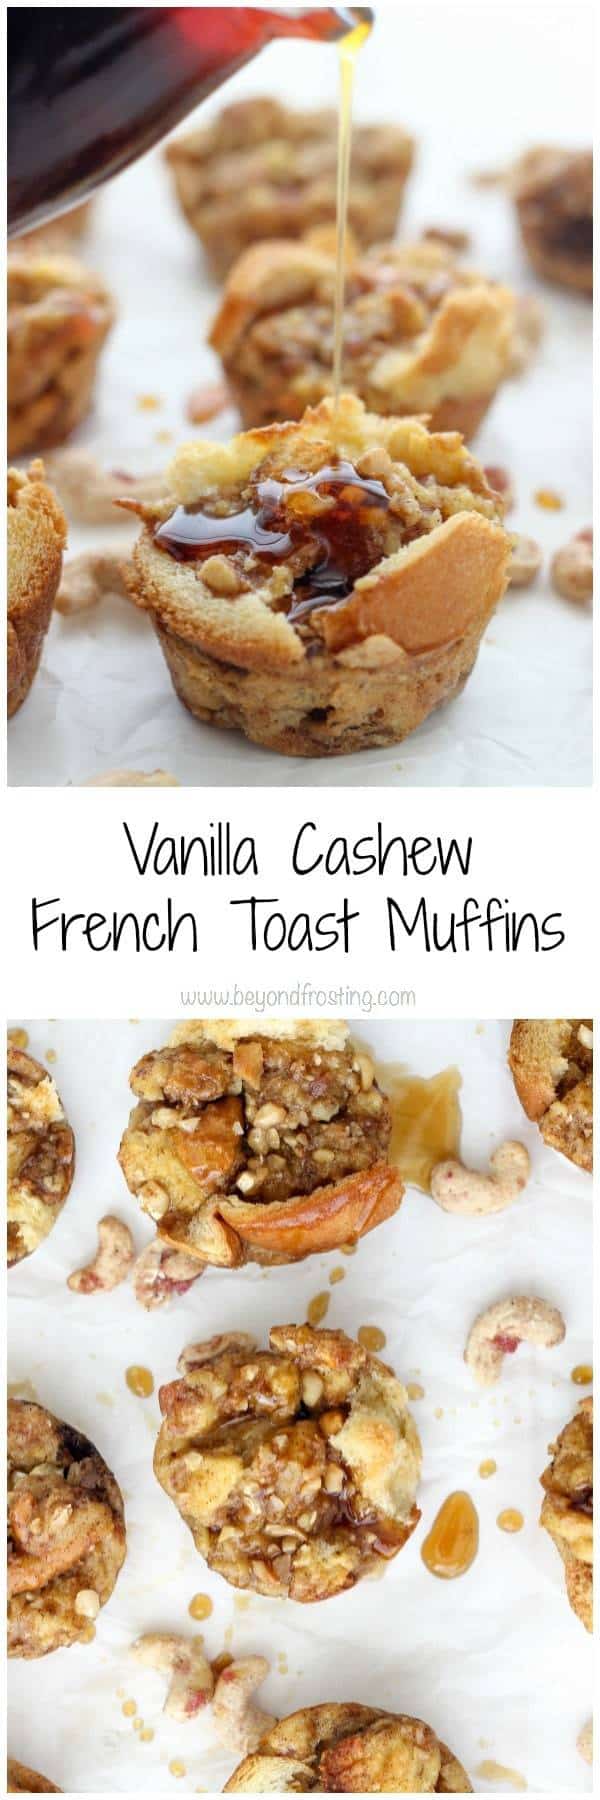 These Vanilla Cashew French Toast Muffins are baked to perfection. Loaded with maple syrup, vanilla beans and sweetened cashews, these French toast muffins never looked so good.